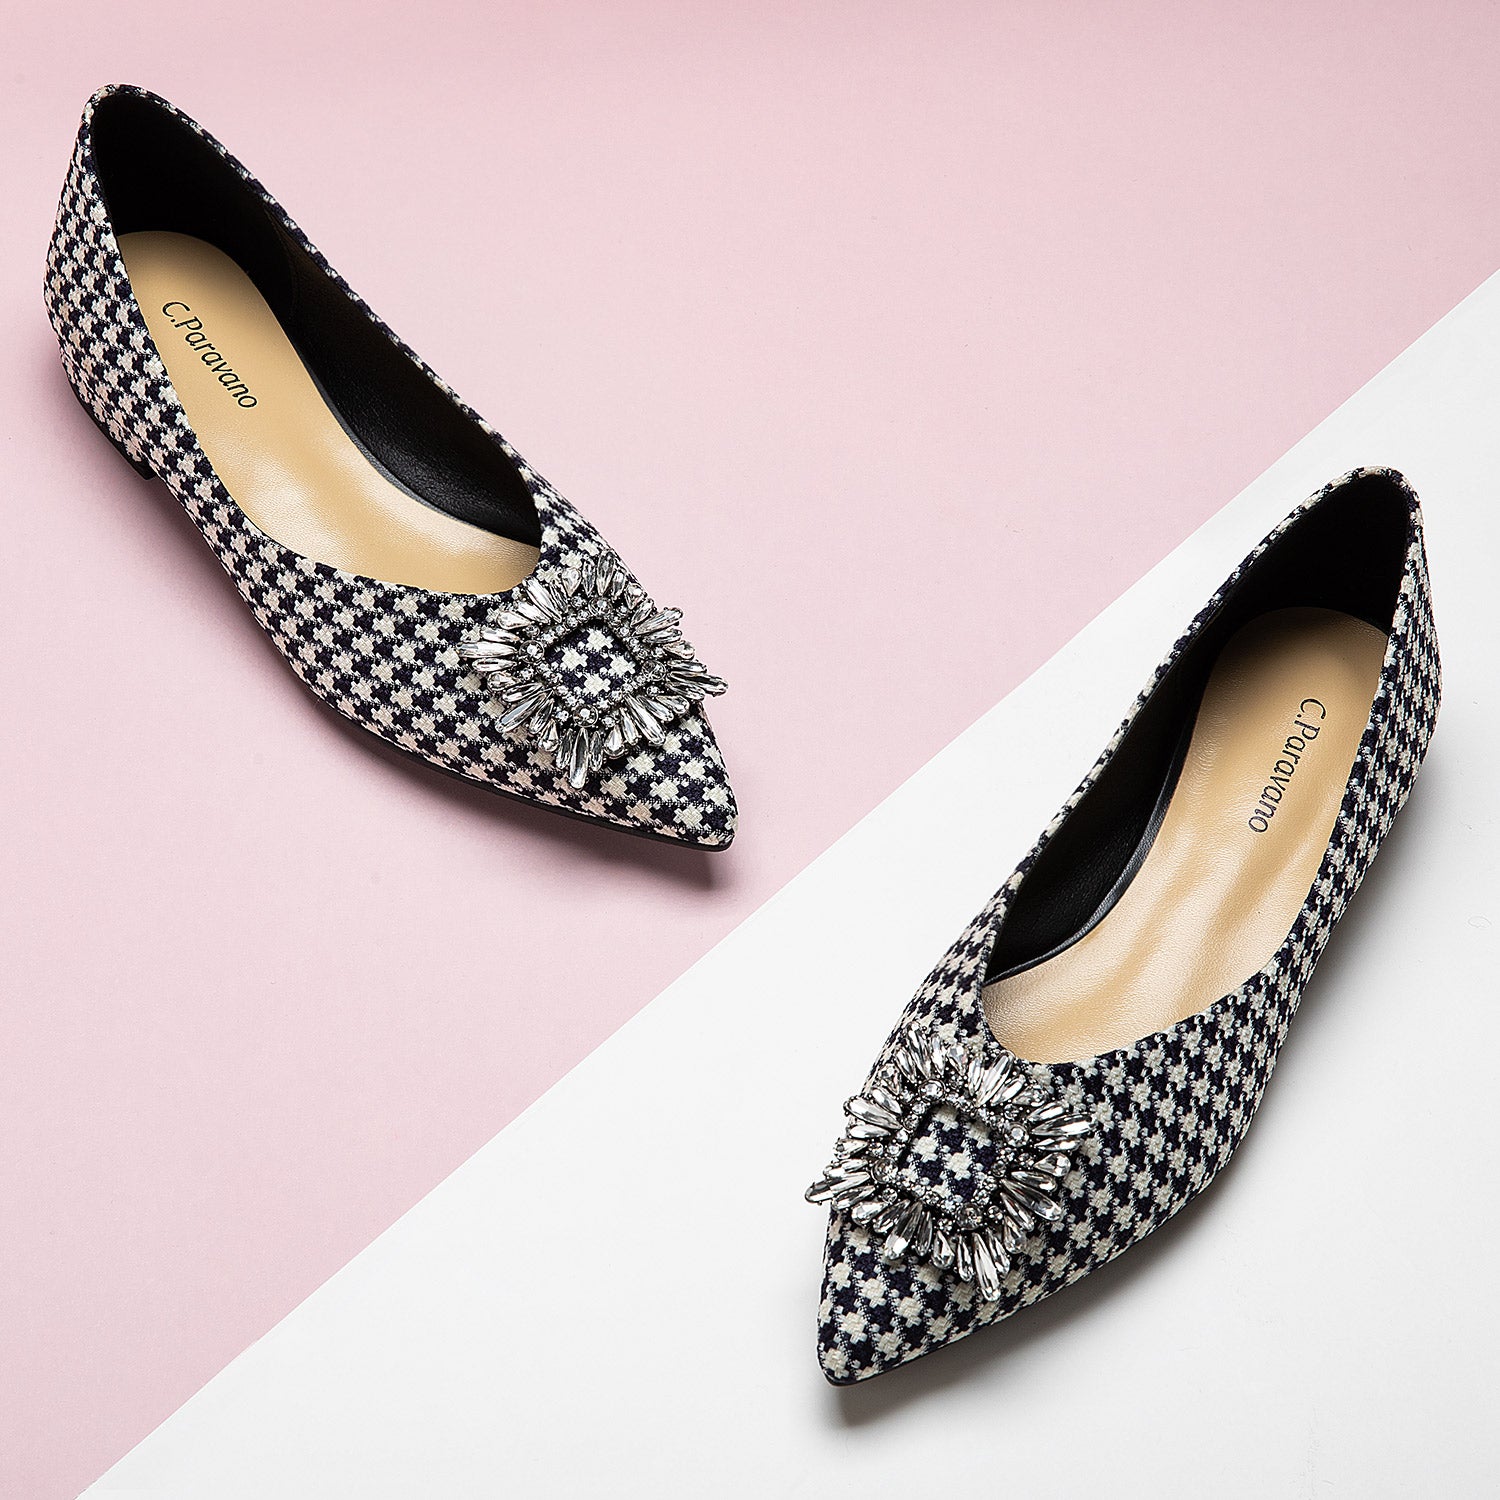 Sophisticated Patterns: Houndstooth Tweed Flats for women, a stylish choice for a polished and refined look